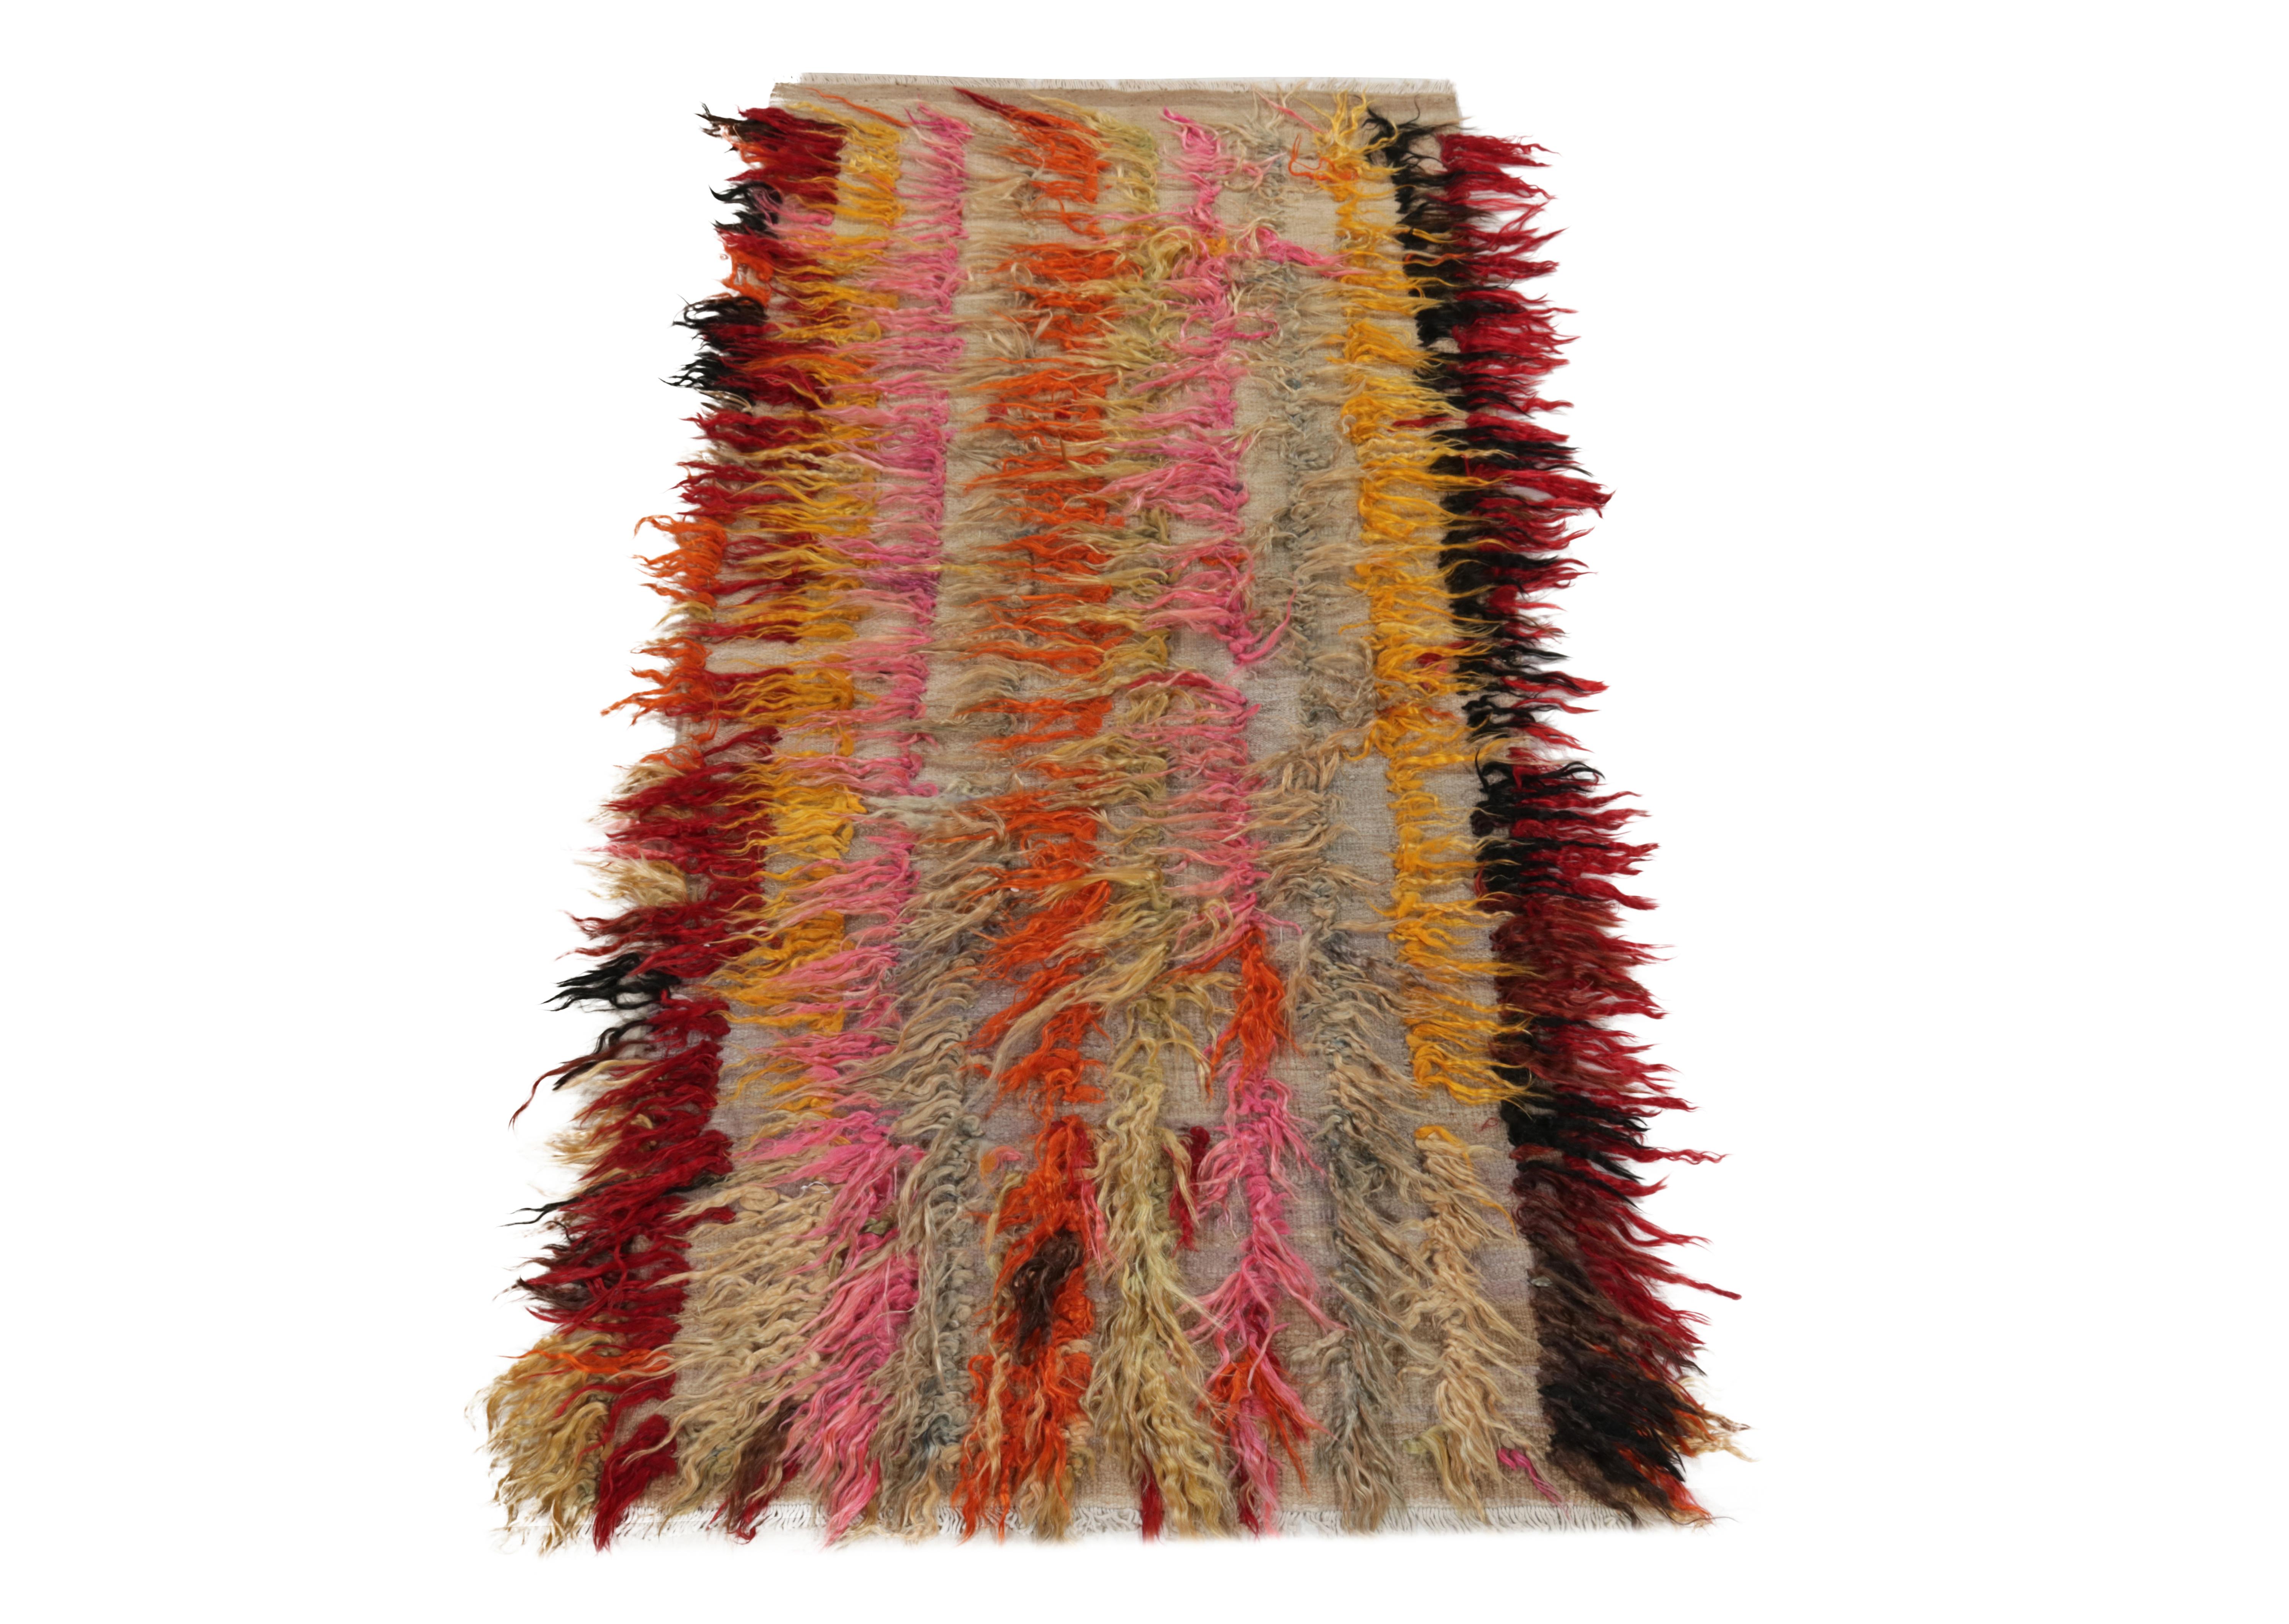 Hand-knotted in wool circa 1950-1960, this 3x6 vintage runner enjoys a delicious high pile in bold red, black, mango yellow, pink & gray joyfully playing with Tulu high-low texturability of the mid century era. Thriving in pristine condition, a